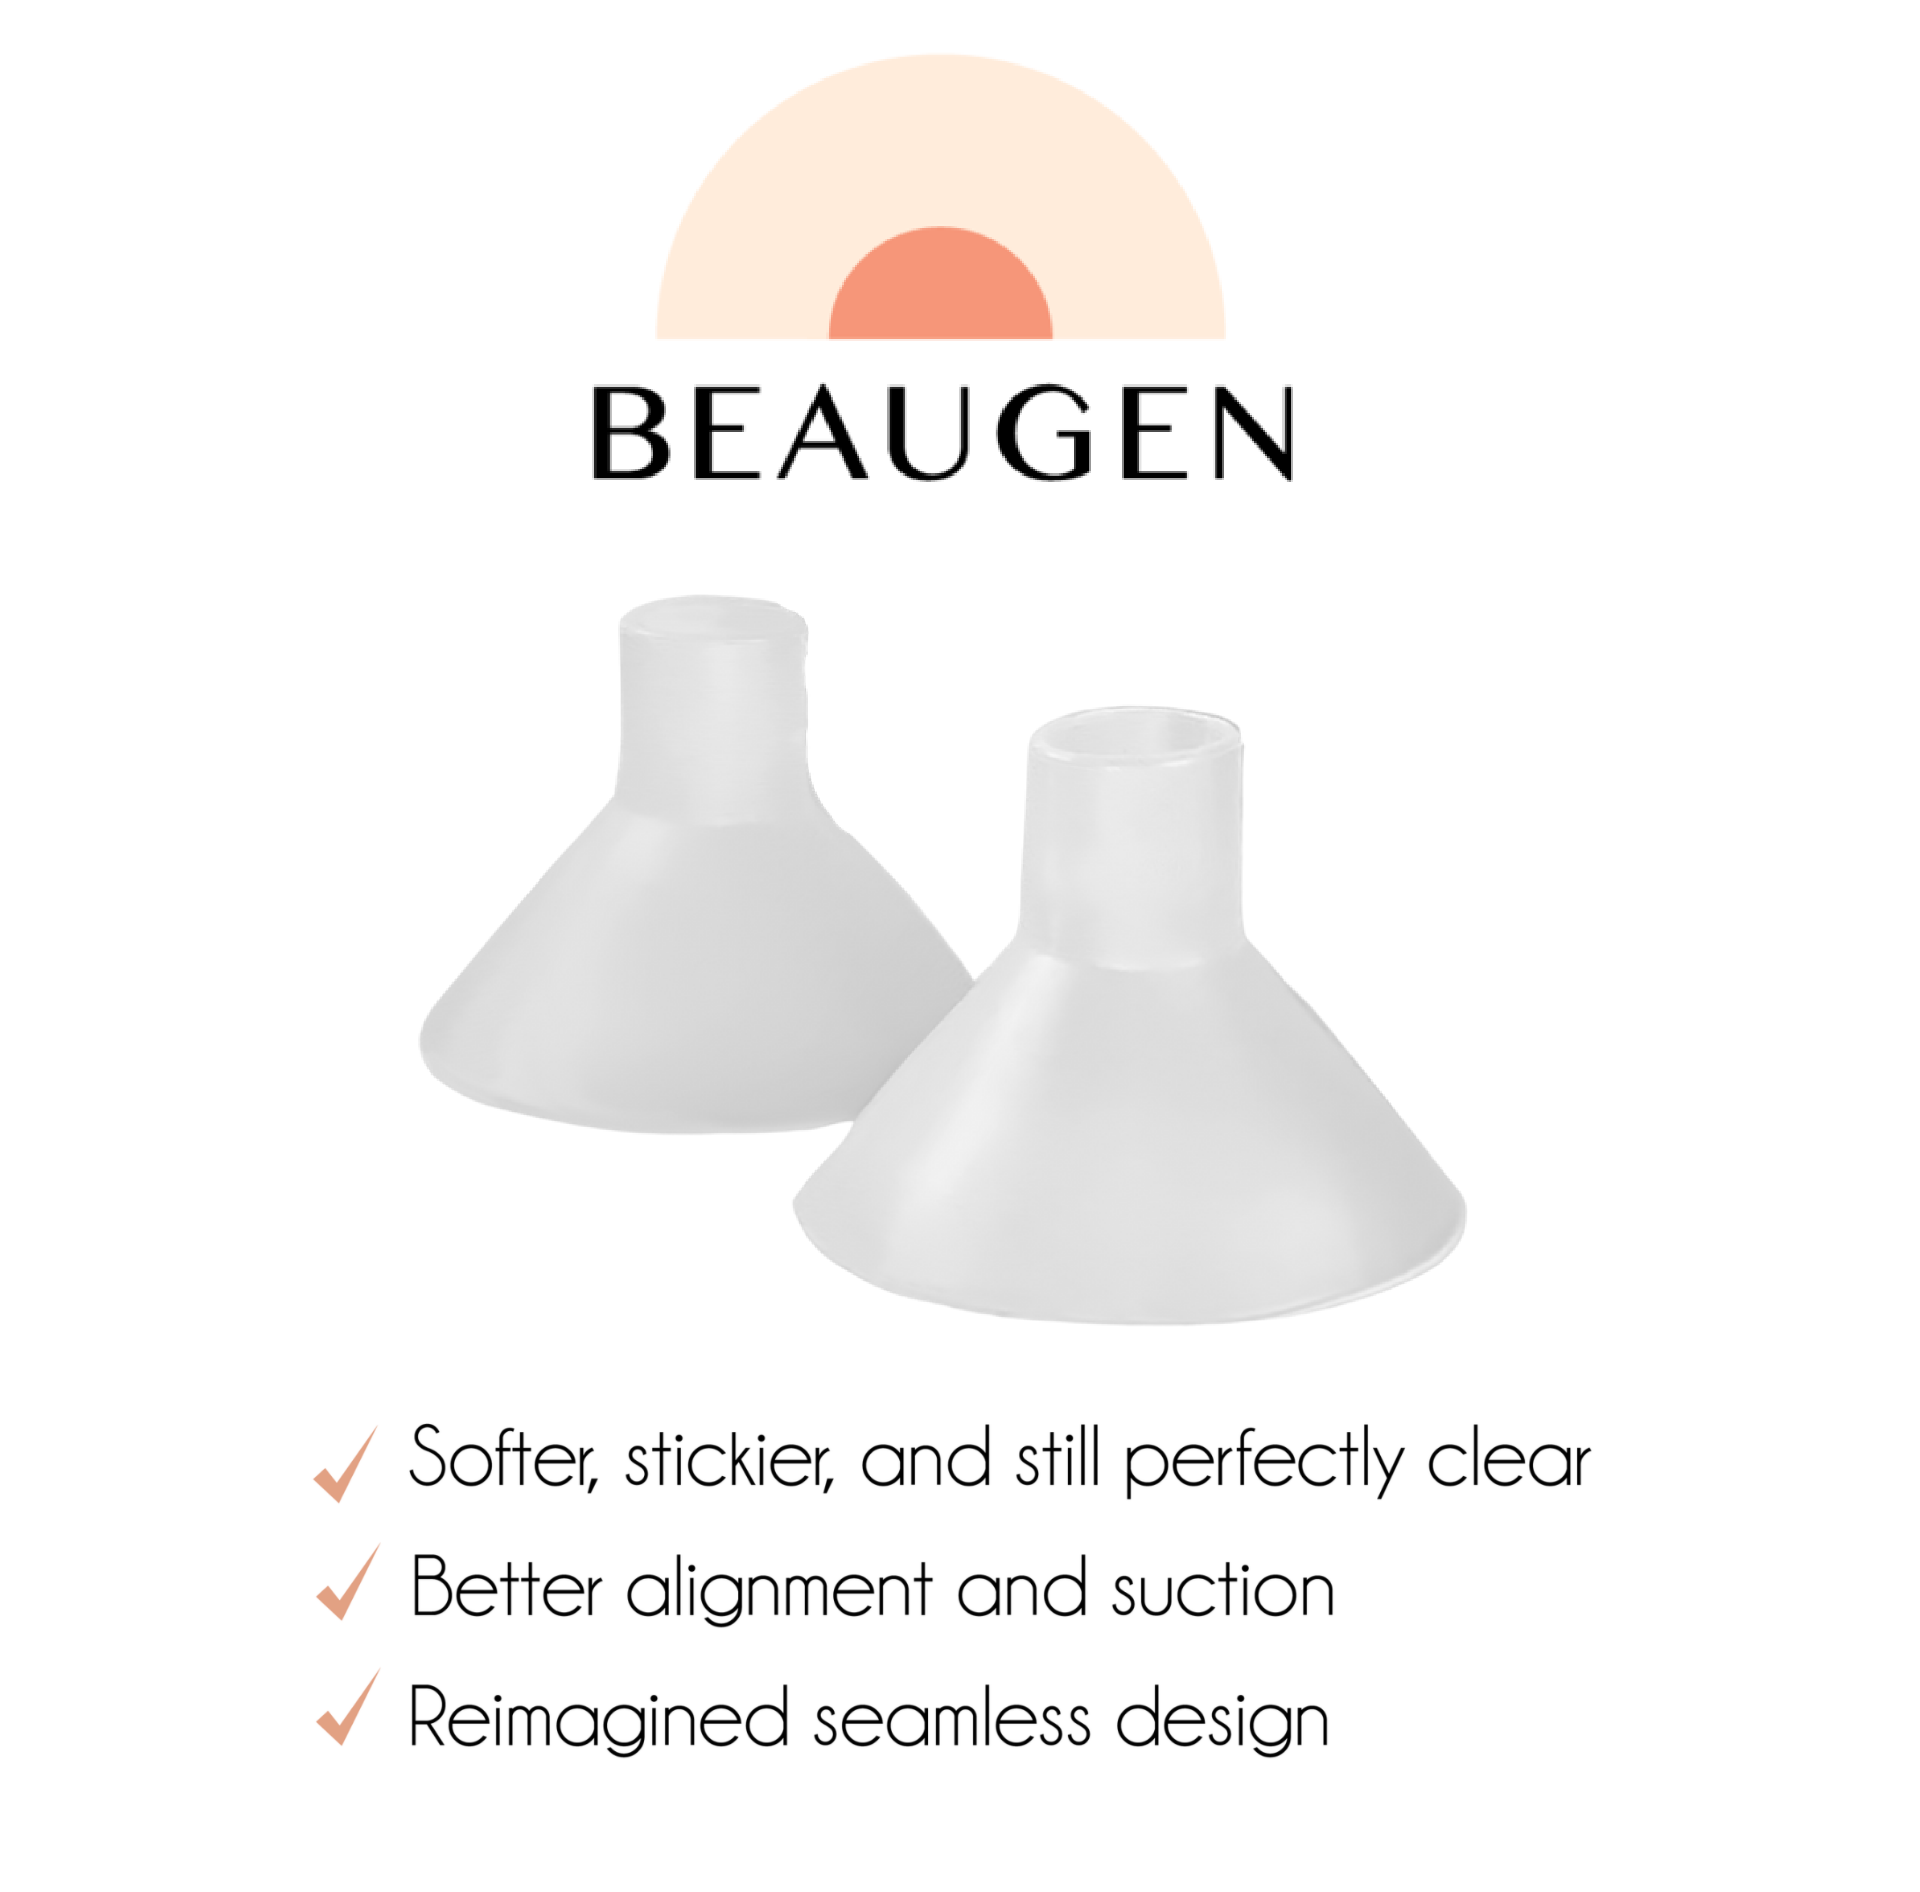 Get all of the soft, sticky, BeauGen Breast Pump Cushion goodness in clear with your order of four pairs of the Clearly Comfy Cushions.